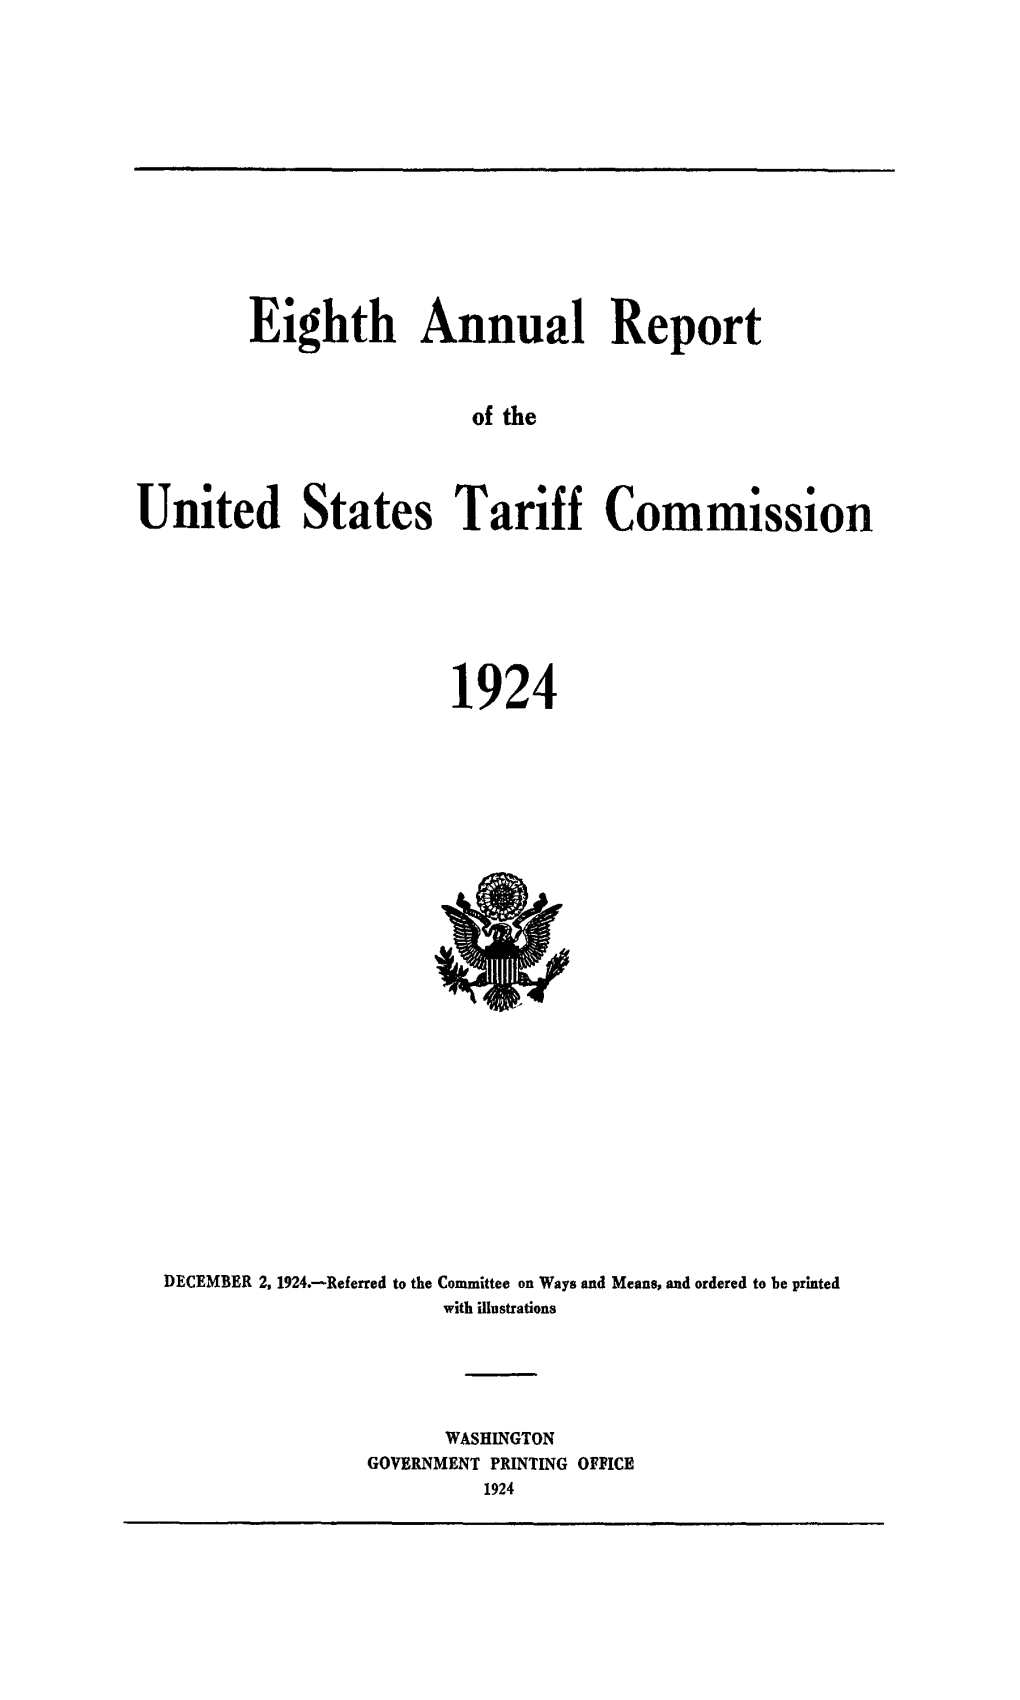 FY 1924 Annual Report